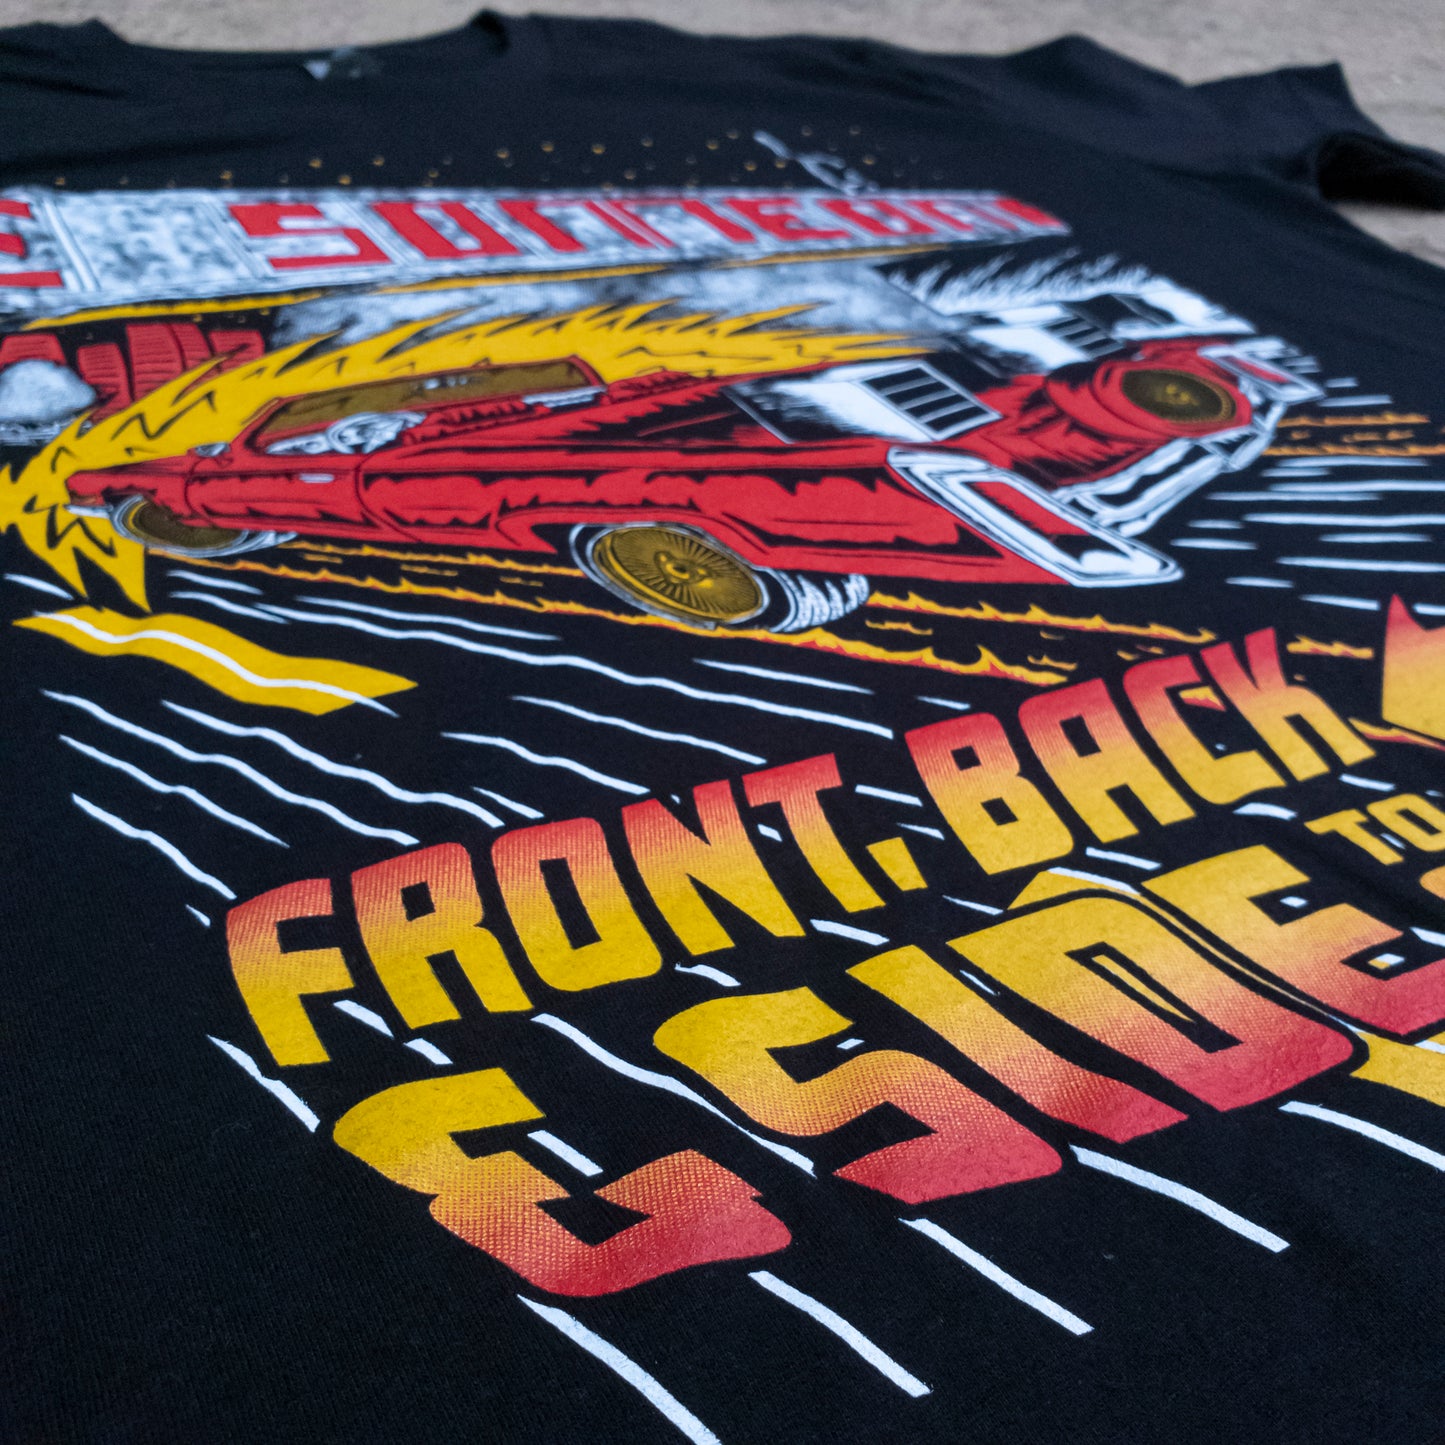 Slab To The Future T-Shirt